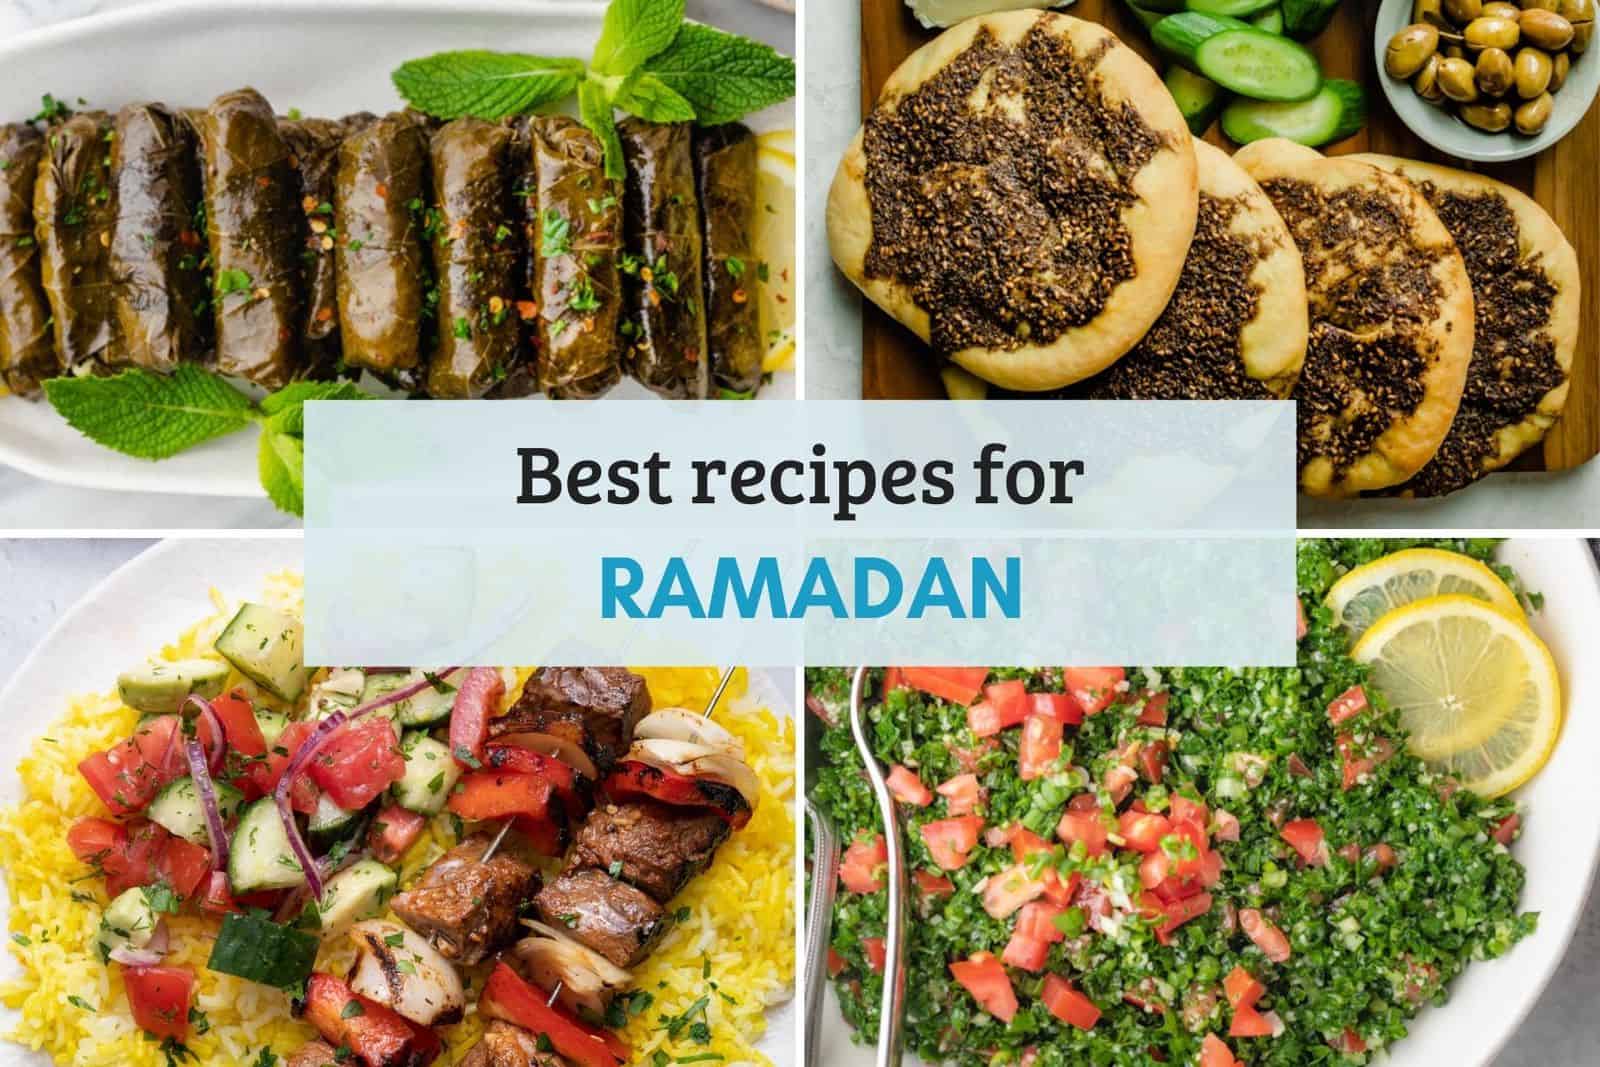 Round up of images for Ramadan meal ideas resized for landing page